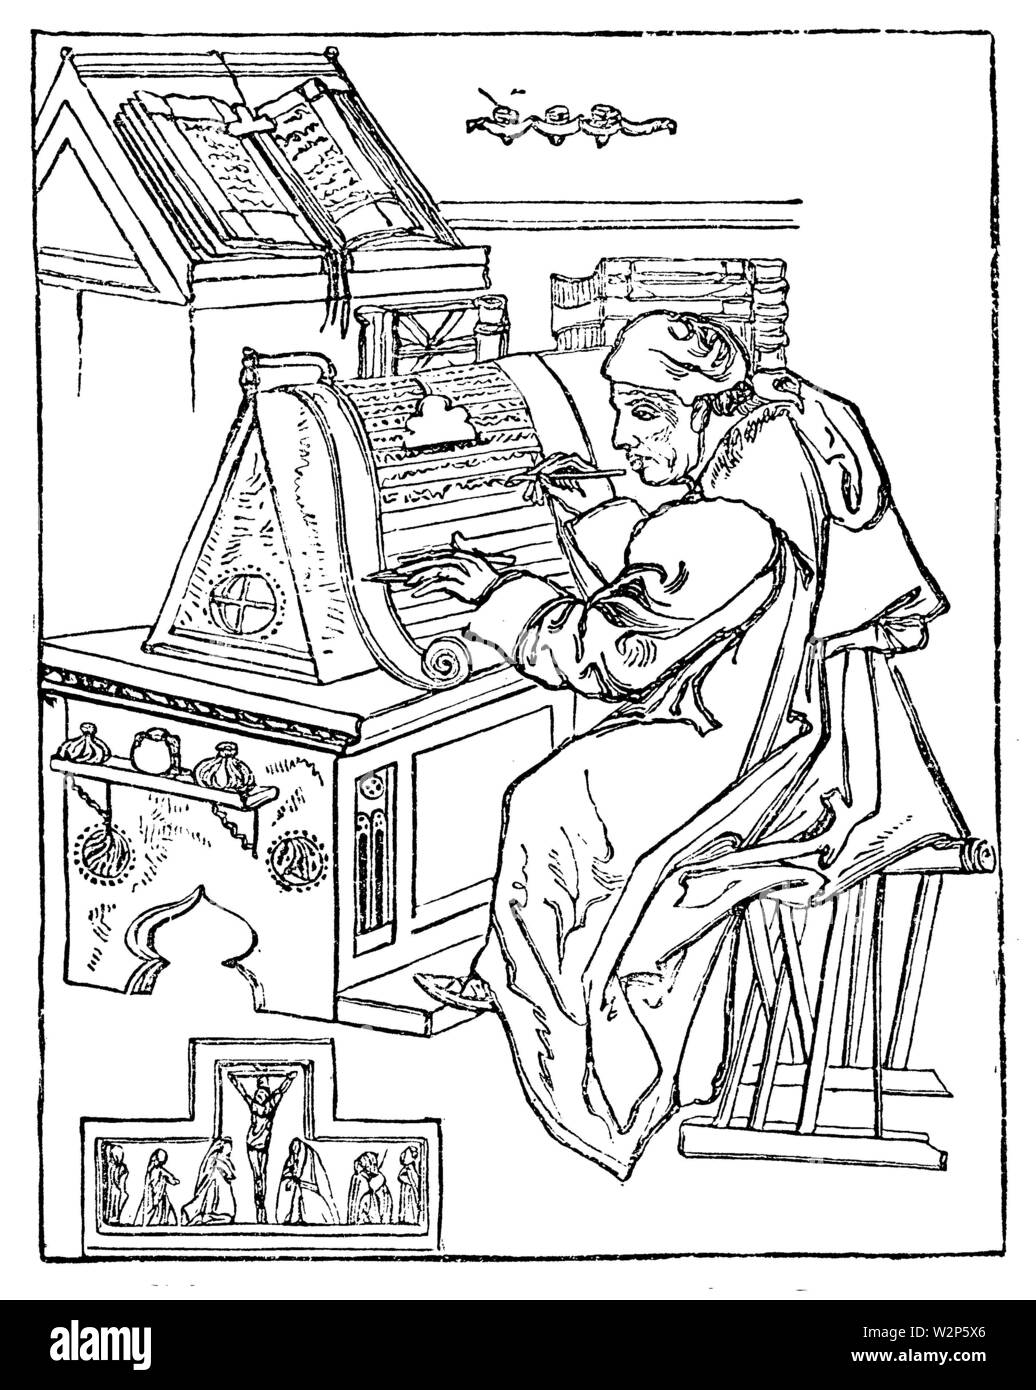 Writing monk in his cell, surrounded by utensils for writing and illuminating. According to a medieval manuscript, ,  (literary history book, 1881) Stock Photo